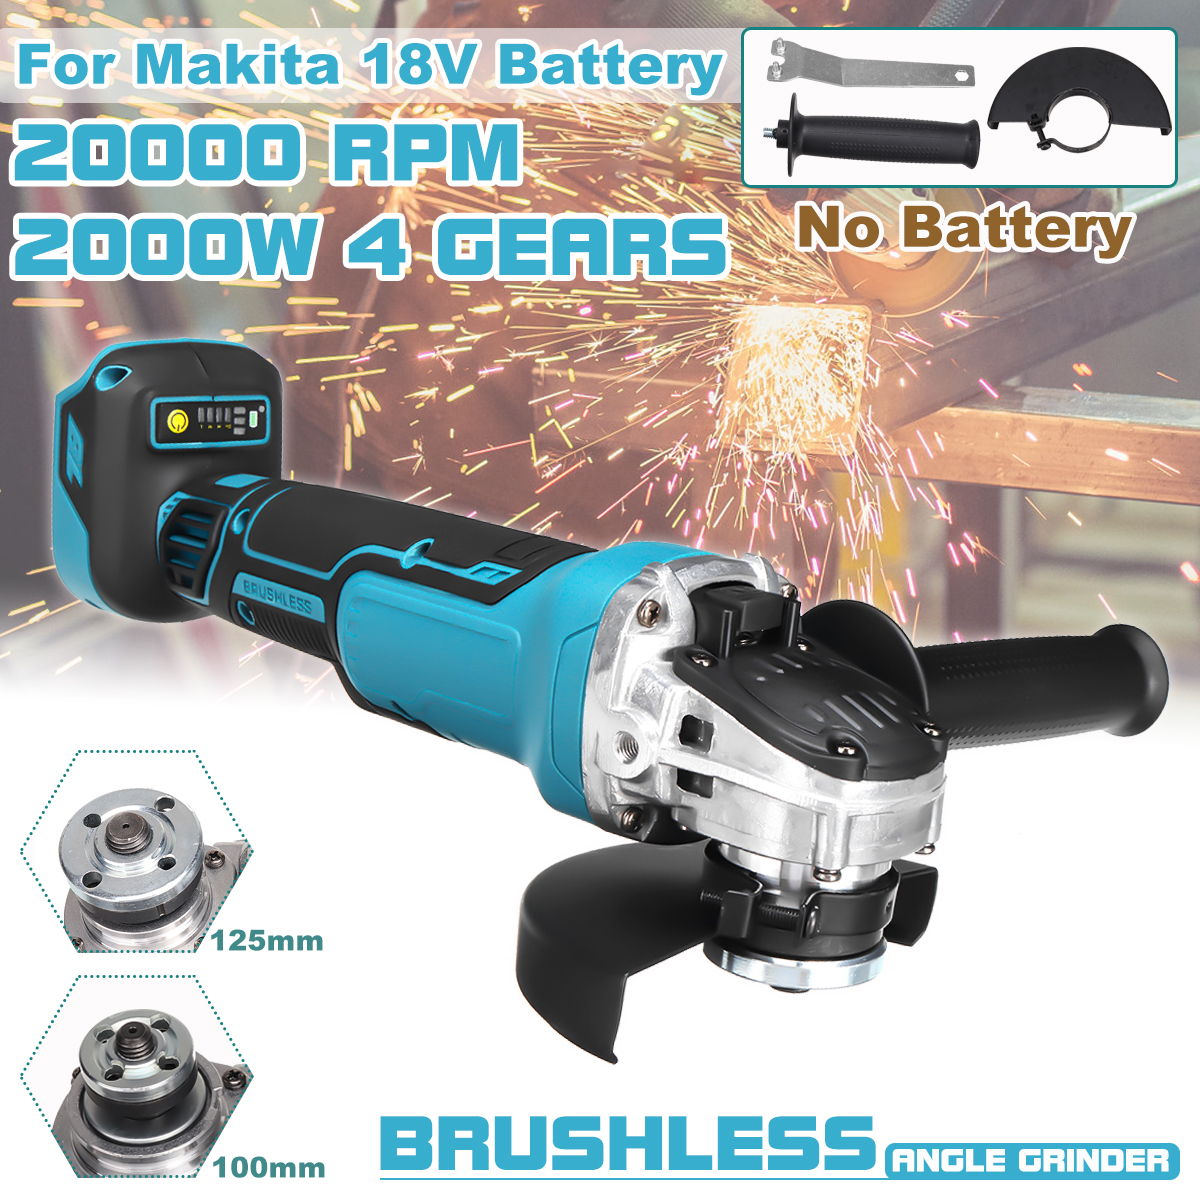 2000W-100125mm-3-Gears-Brushless-Electric-Angle-Grinder-Cordless-Electric-Grinder-Polishing-Machine--1916693-1